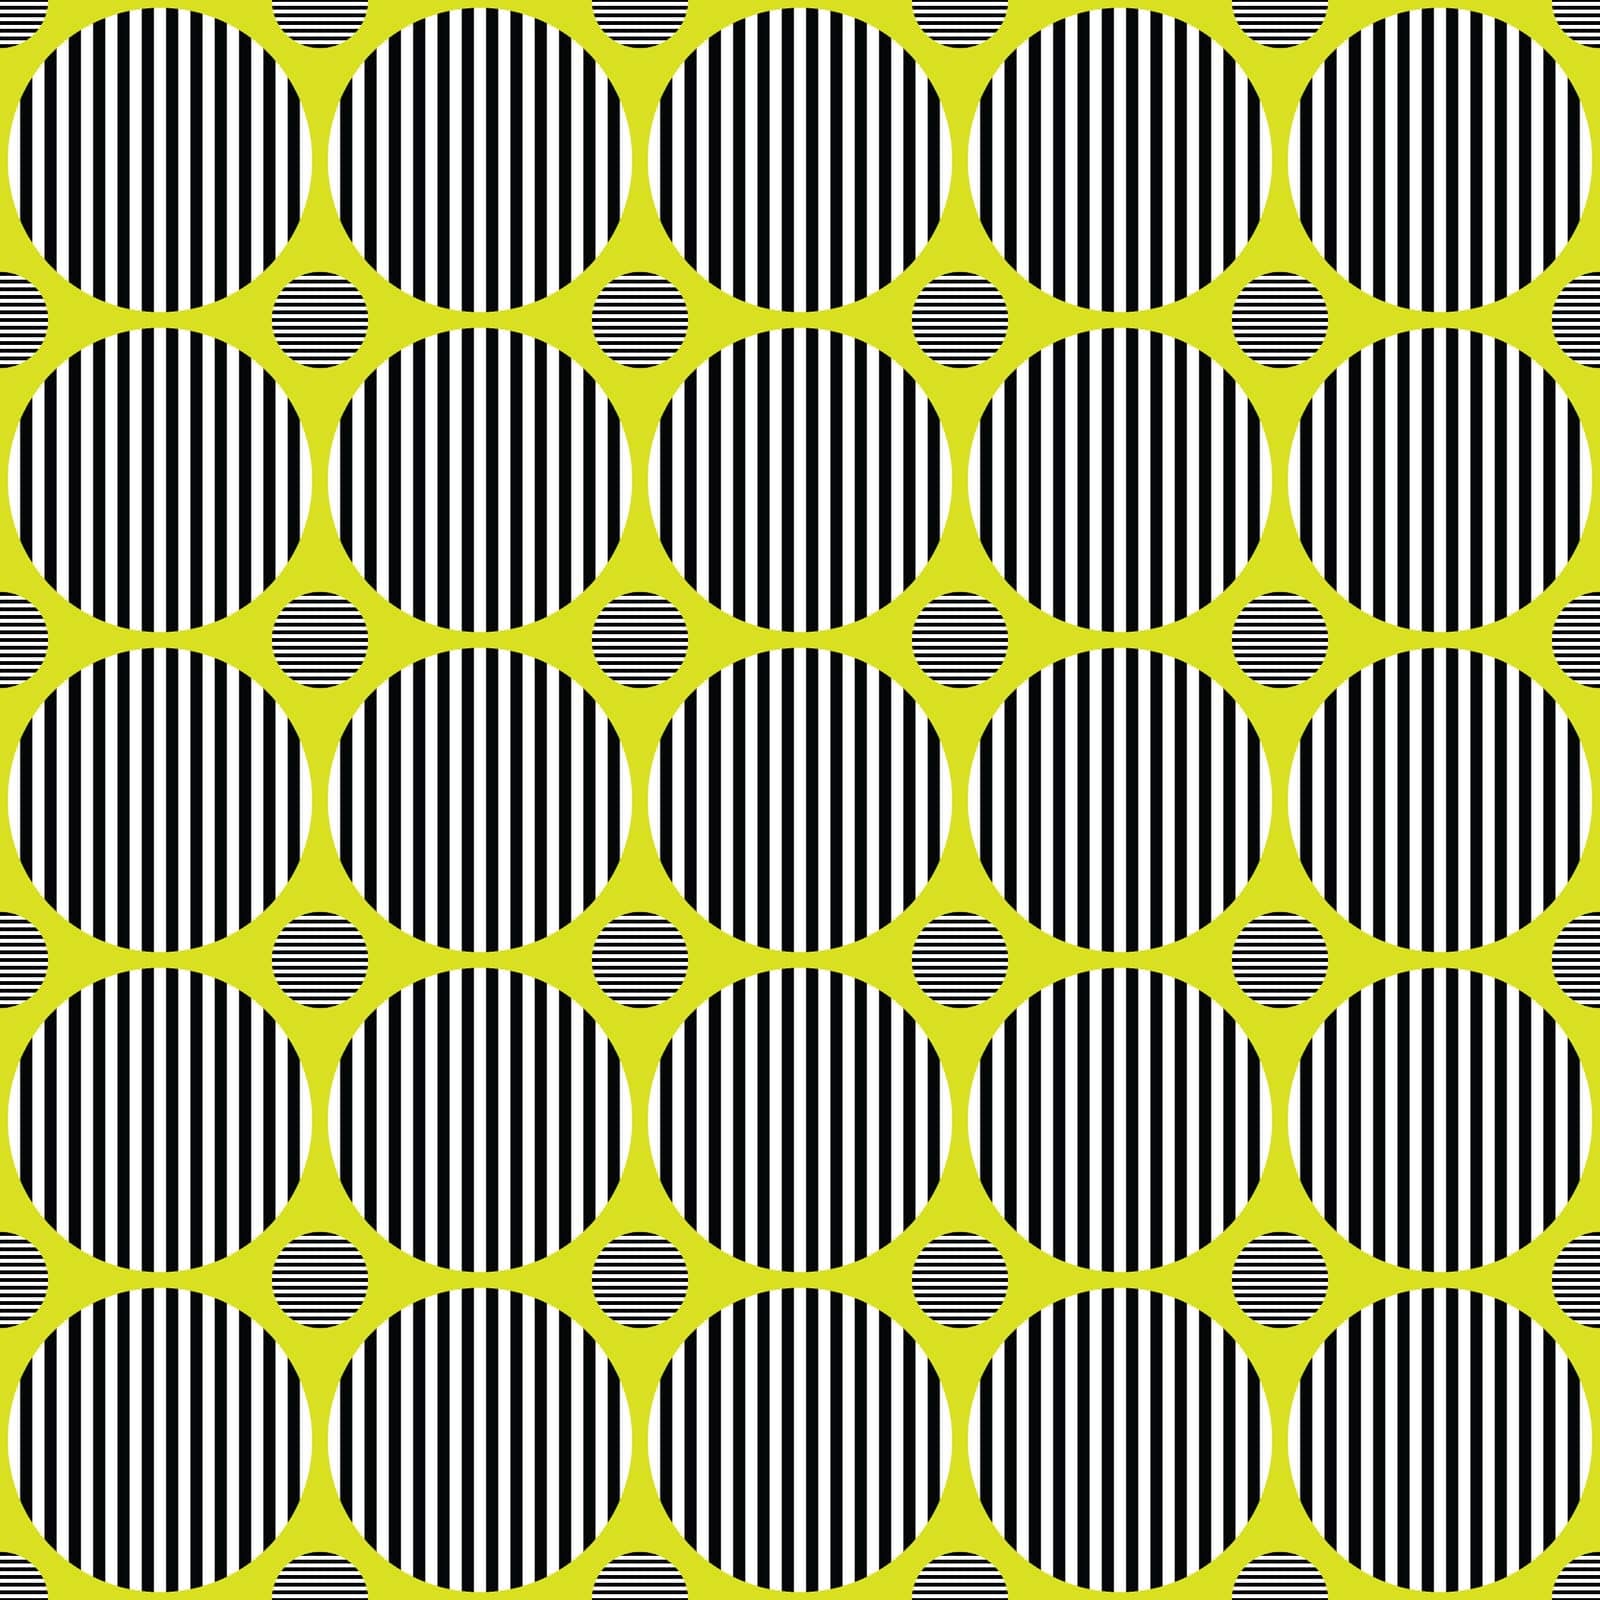 template,pattern,circles,simple,presentation,desktop,white,modern,paper,web,decor,design,repeat,publication,stripe,stationery,company,vector,webpage,decoration,graphic,digital,webdesign,striped,seamless,green,brochure,wallpaper,business,backdrop,lime,black,retro,abstract,flyer,round,corporate,background,geometric,style,geometry,illustration,circle,poster,promotion